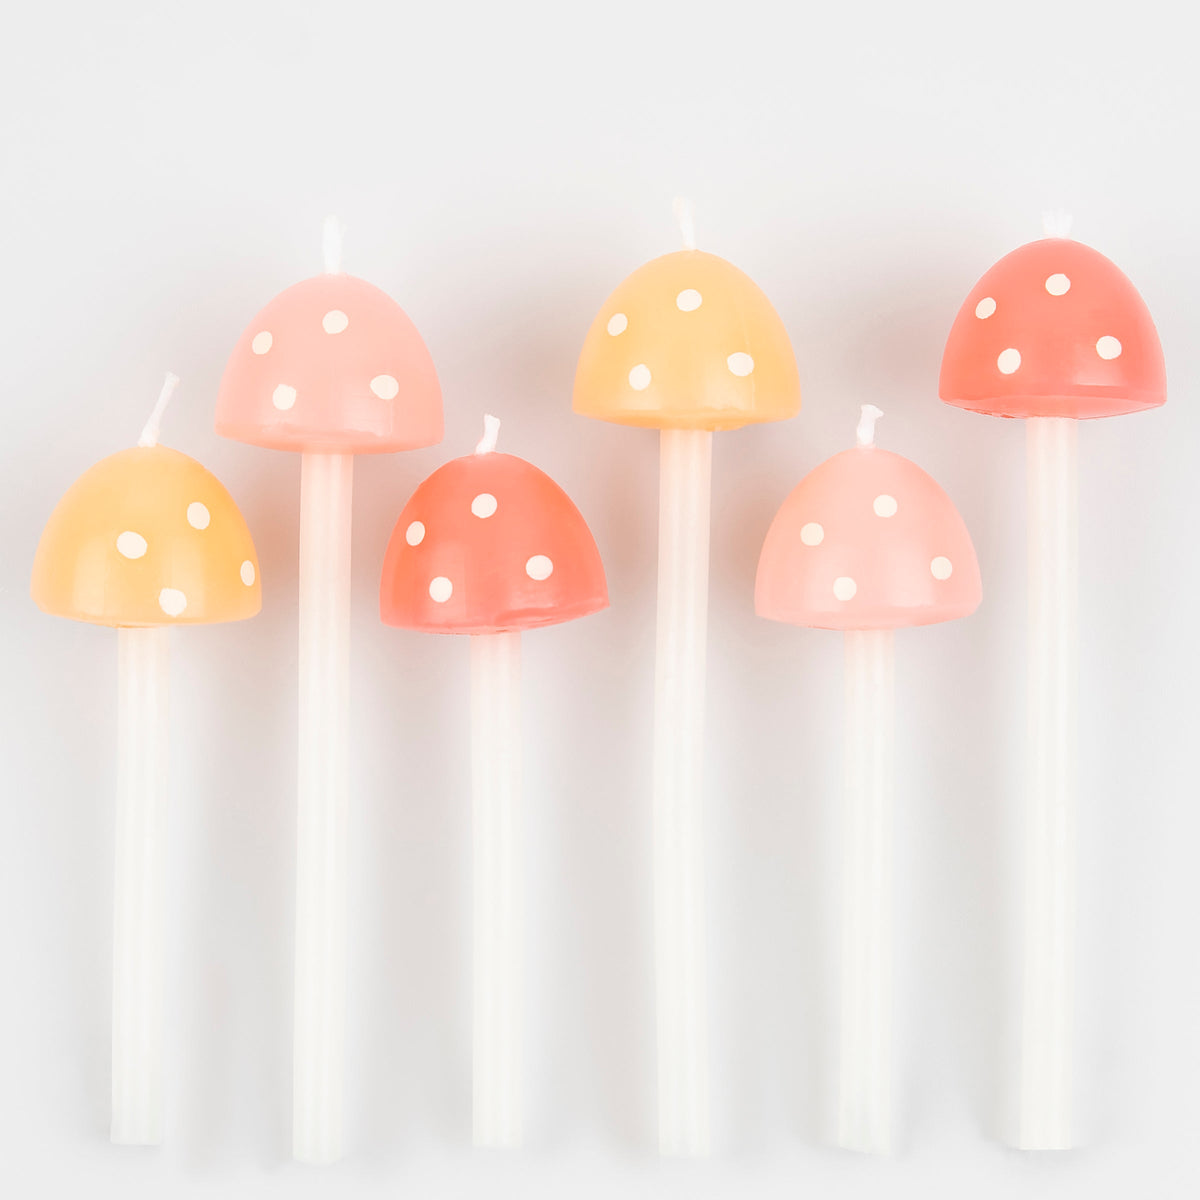 Find our adorable mushroom candles on our website, link in bio 🍄🎂🍄 , moss cake